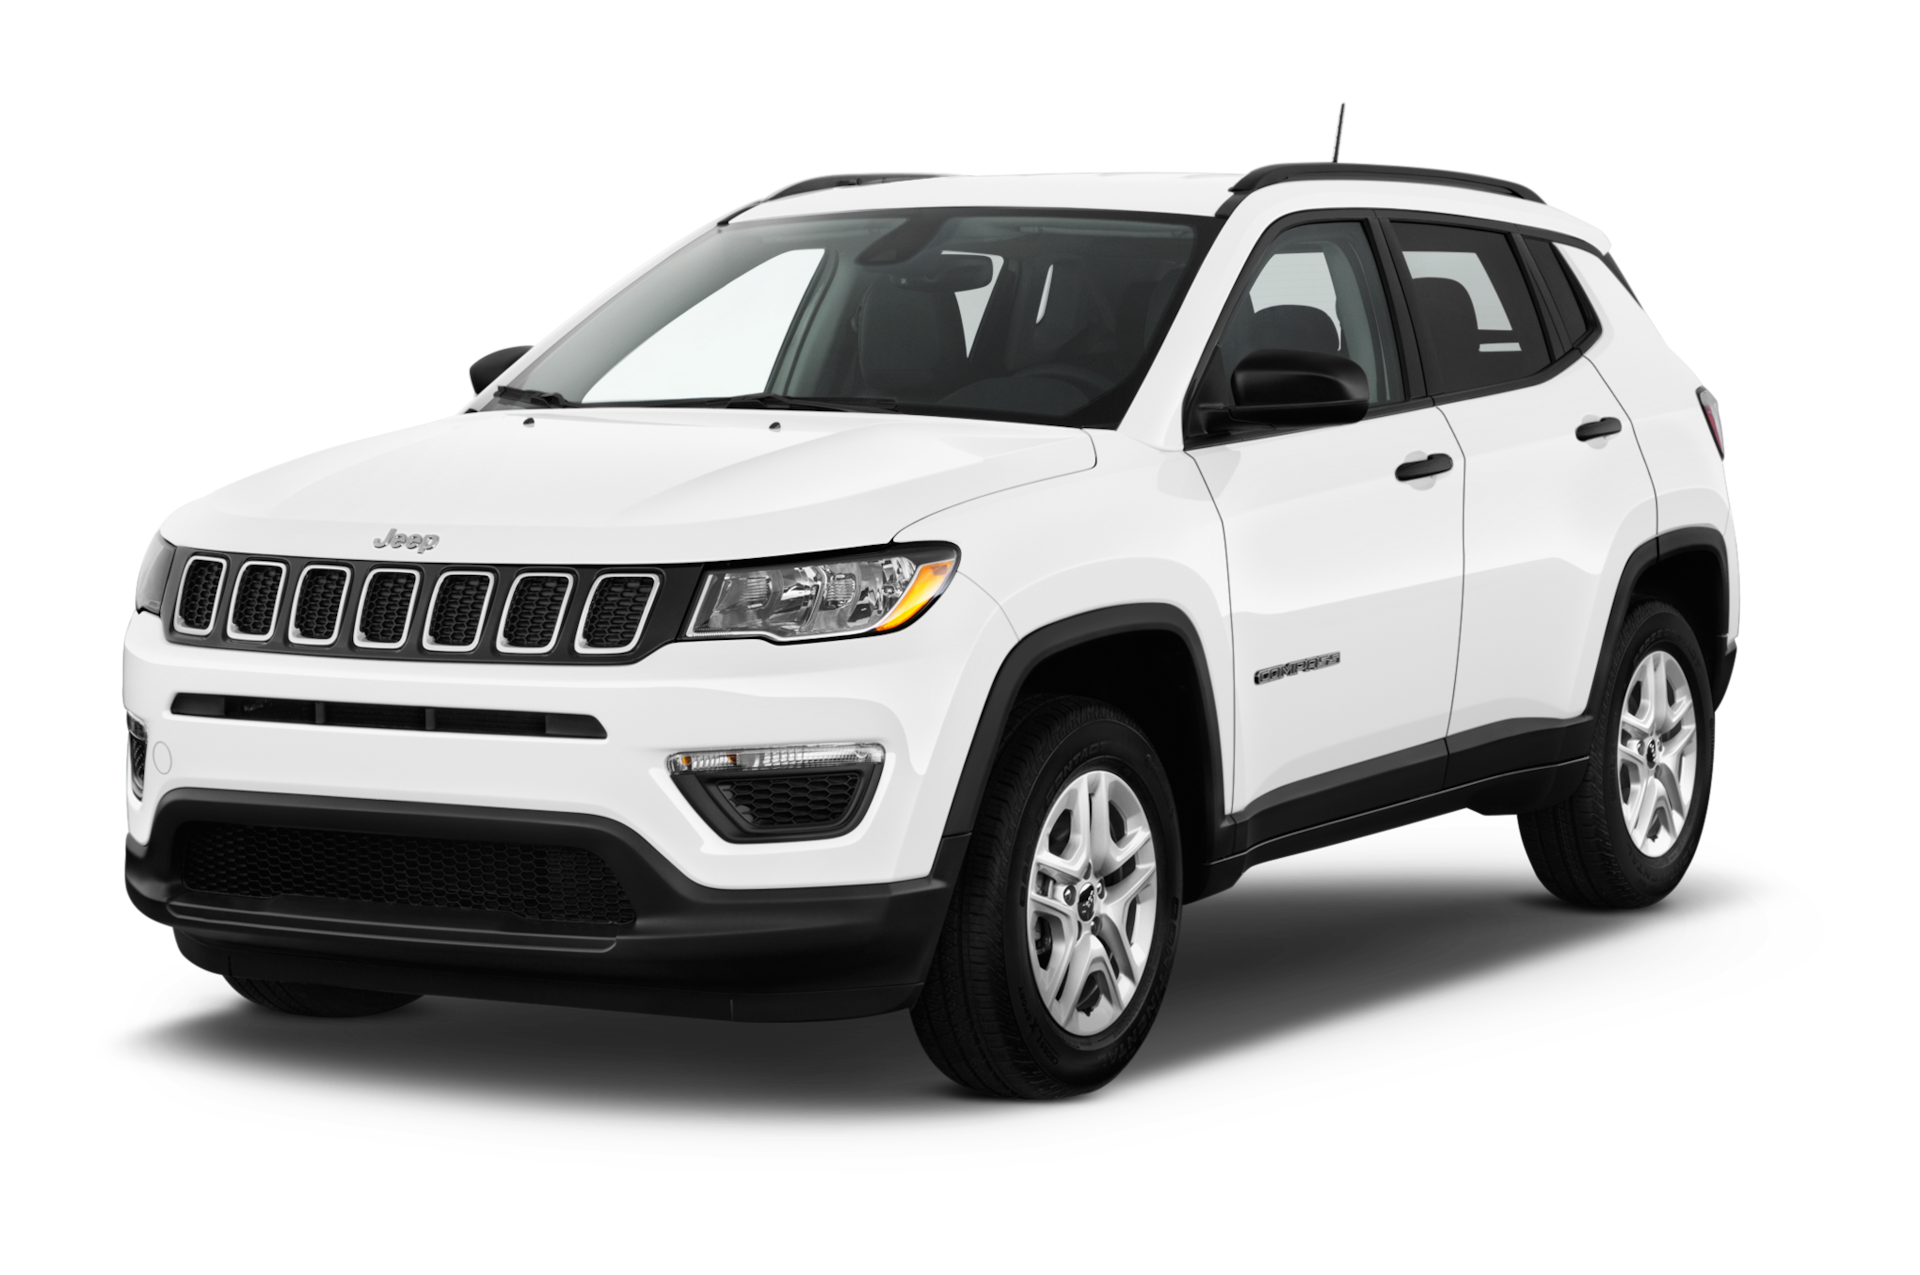 2019 Jeep Compass Prices, Reviews, and Photos - MotorTrend